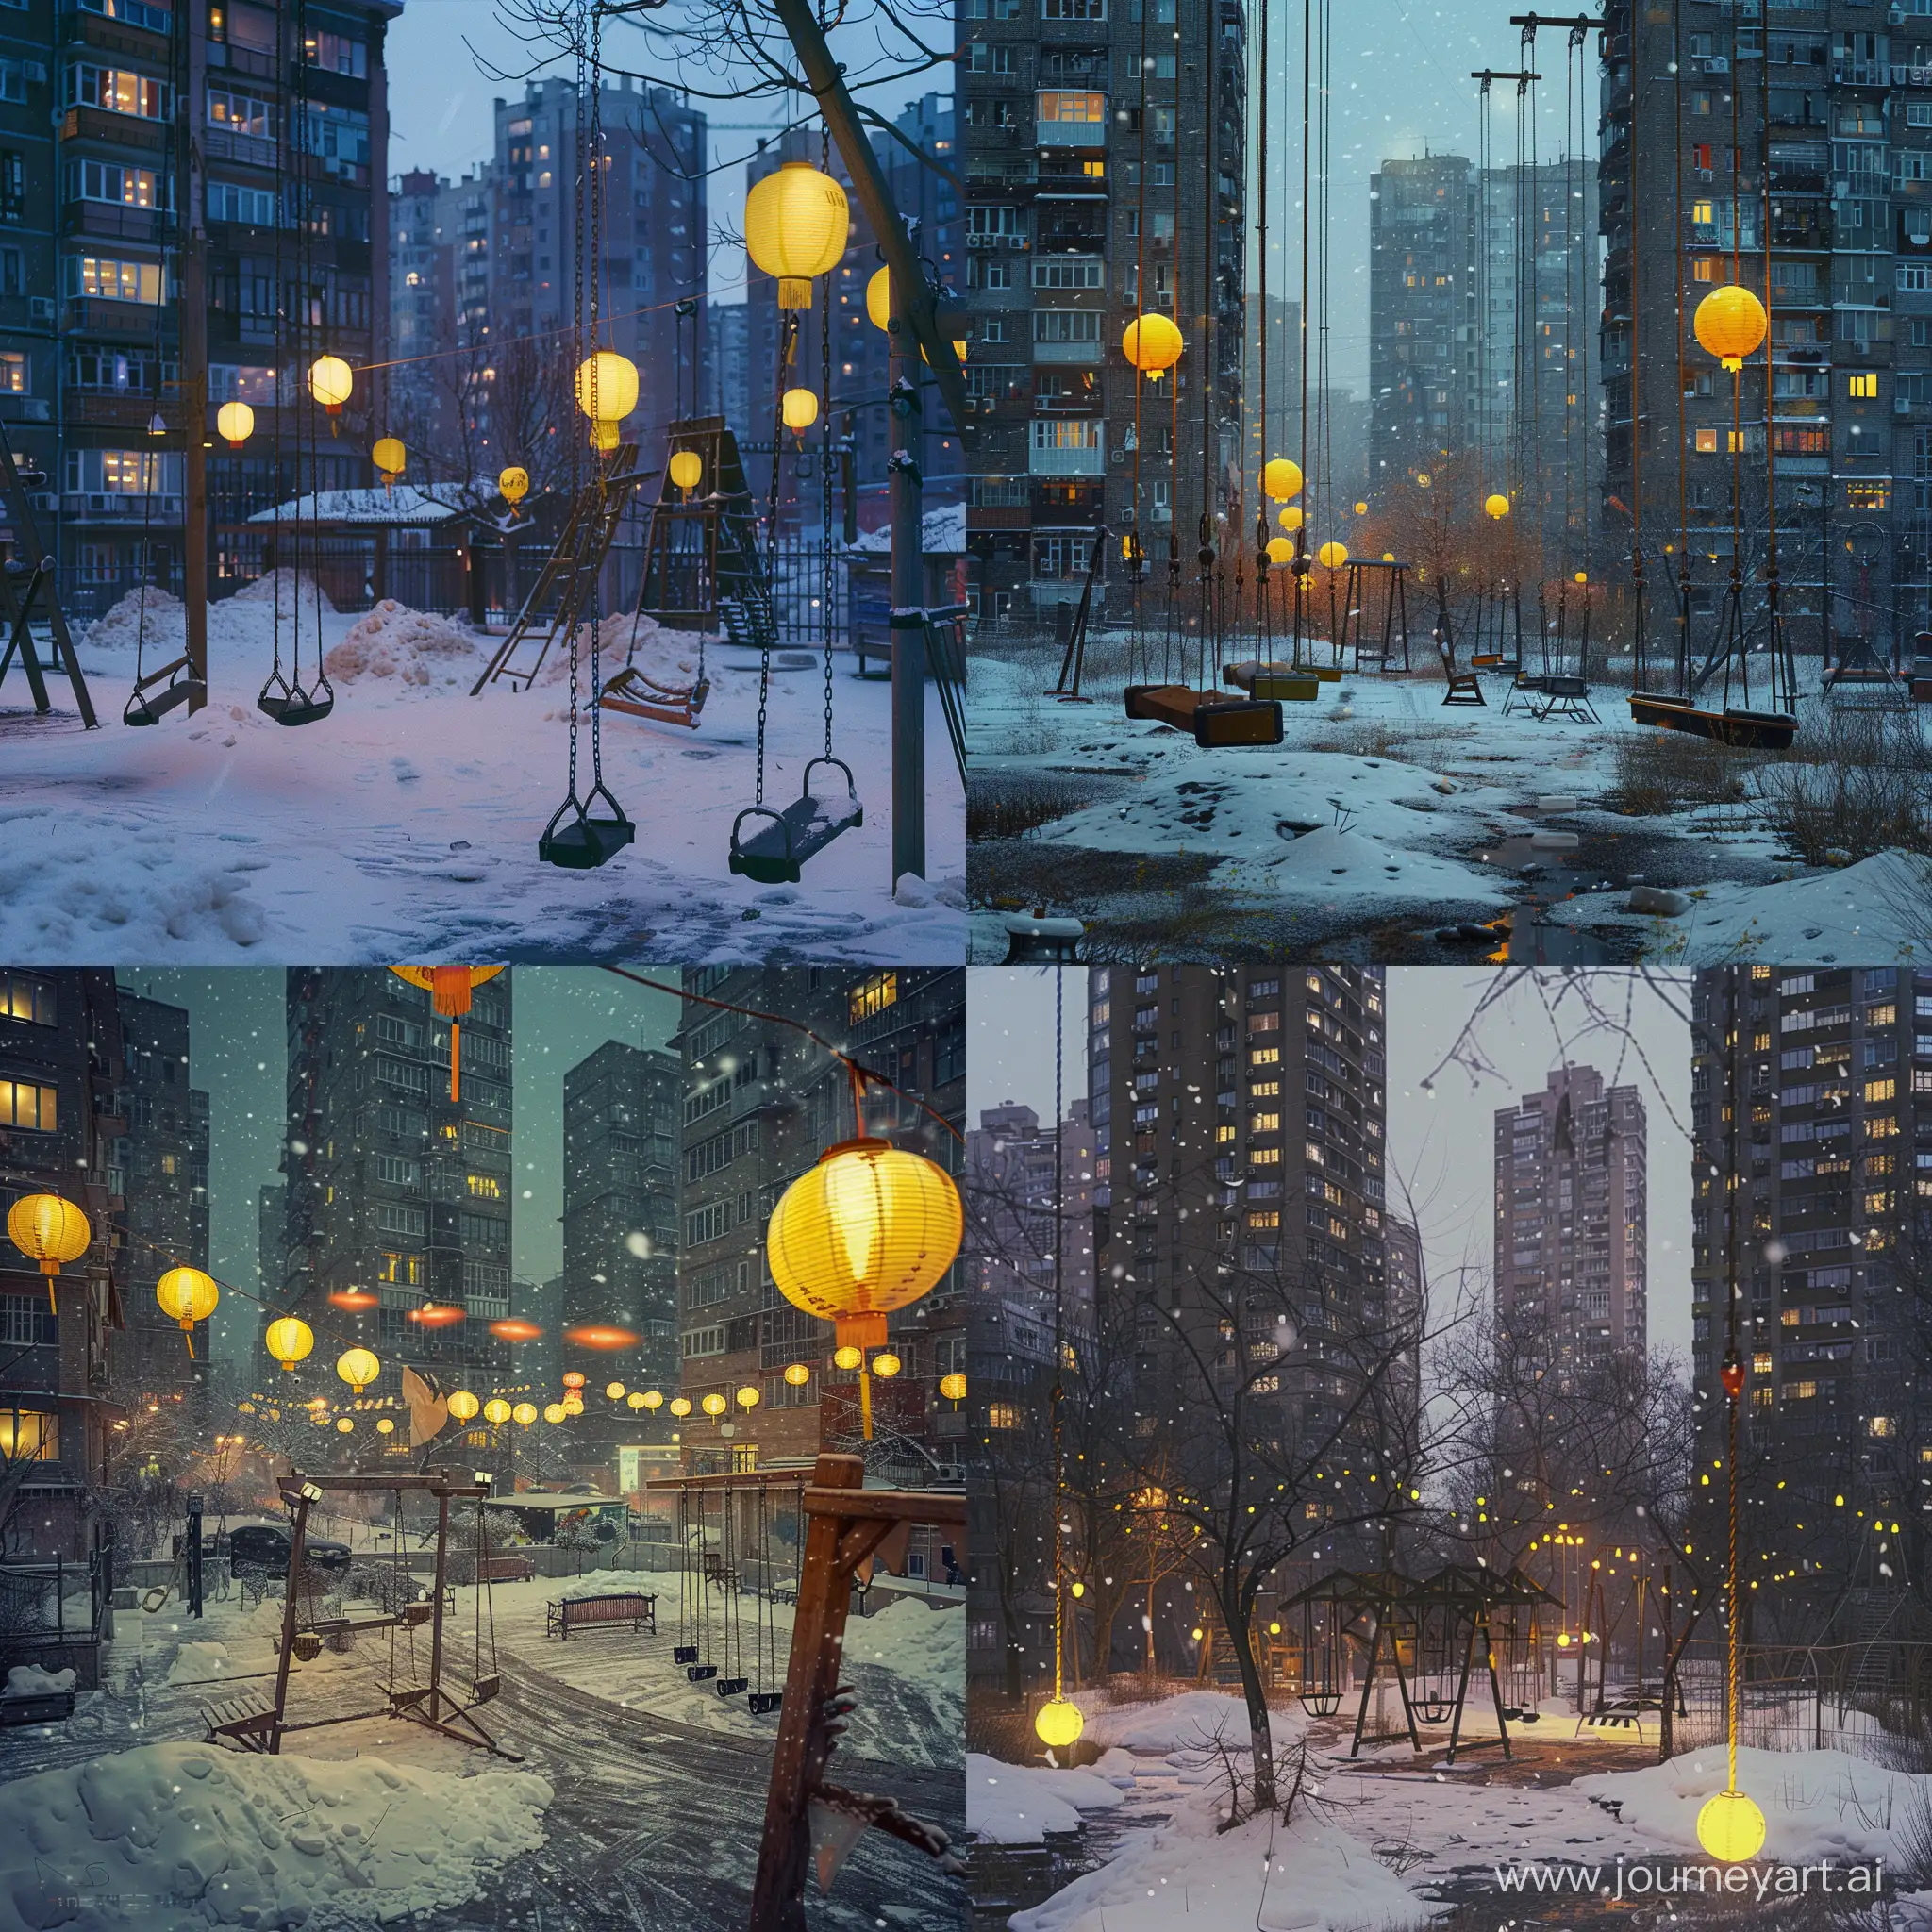 Evening-Nostalgia-Winter-Scenes-with-Highrise-Buildings-and-Yellow-Lanterns